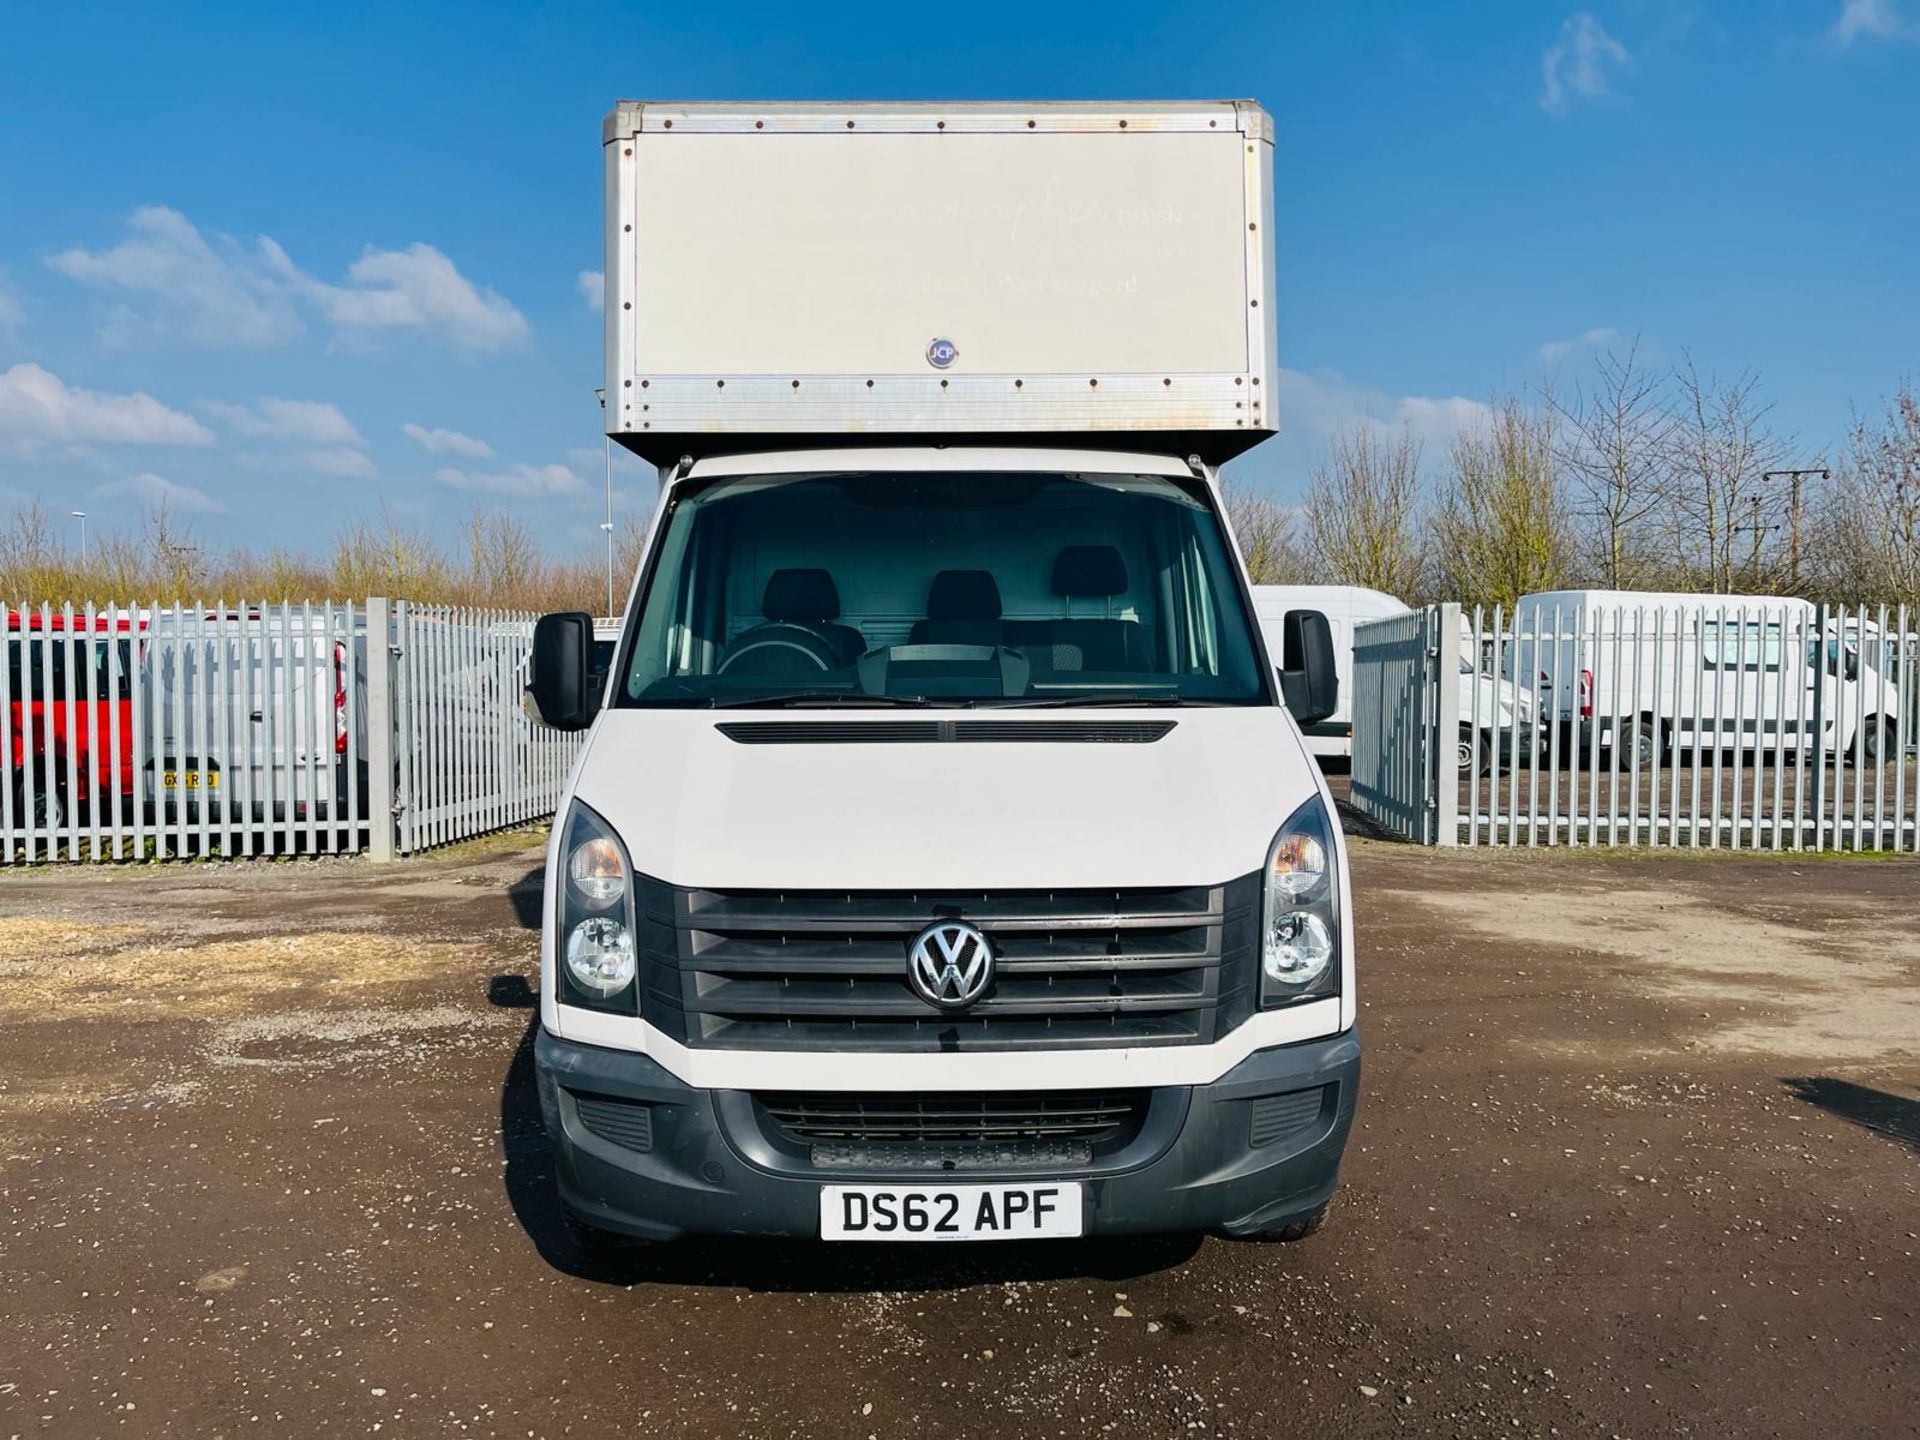 Volkswagen Crafter Luton 35 2.0 Tdi 109 L3 2012 '62 Reg' -Taillift -CD Player - Image 2 of 24